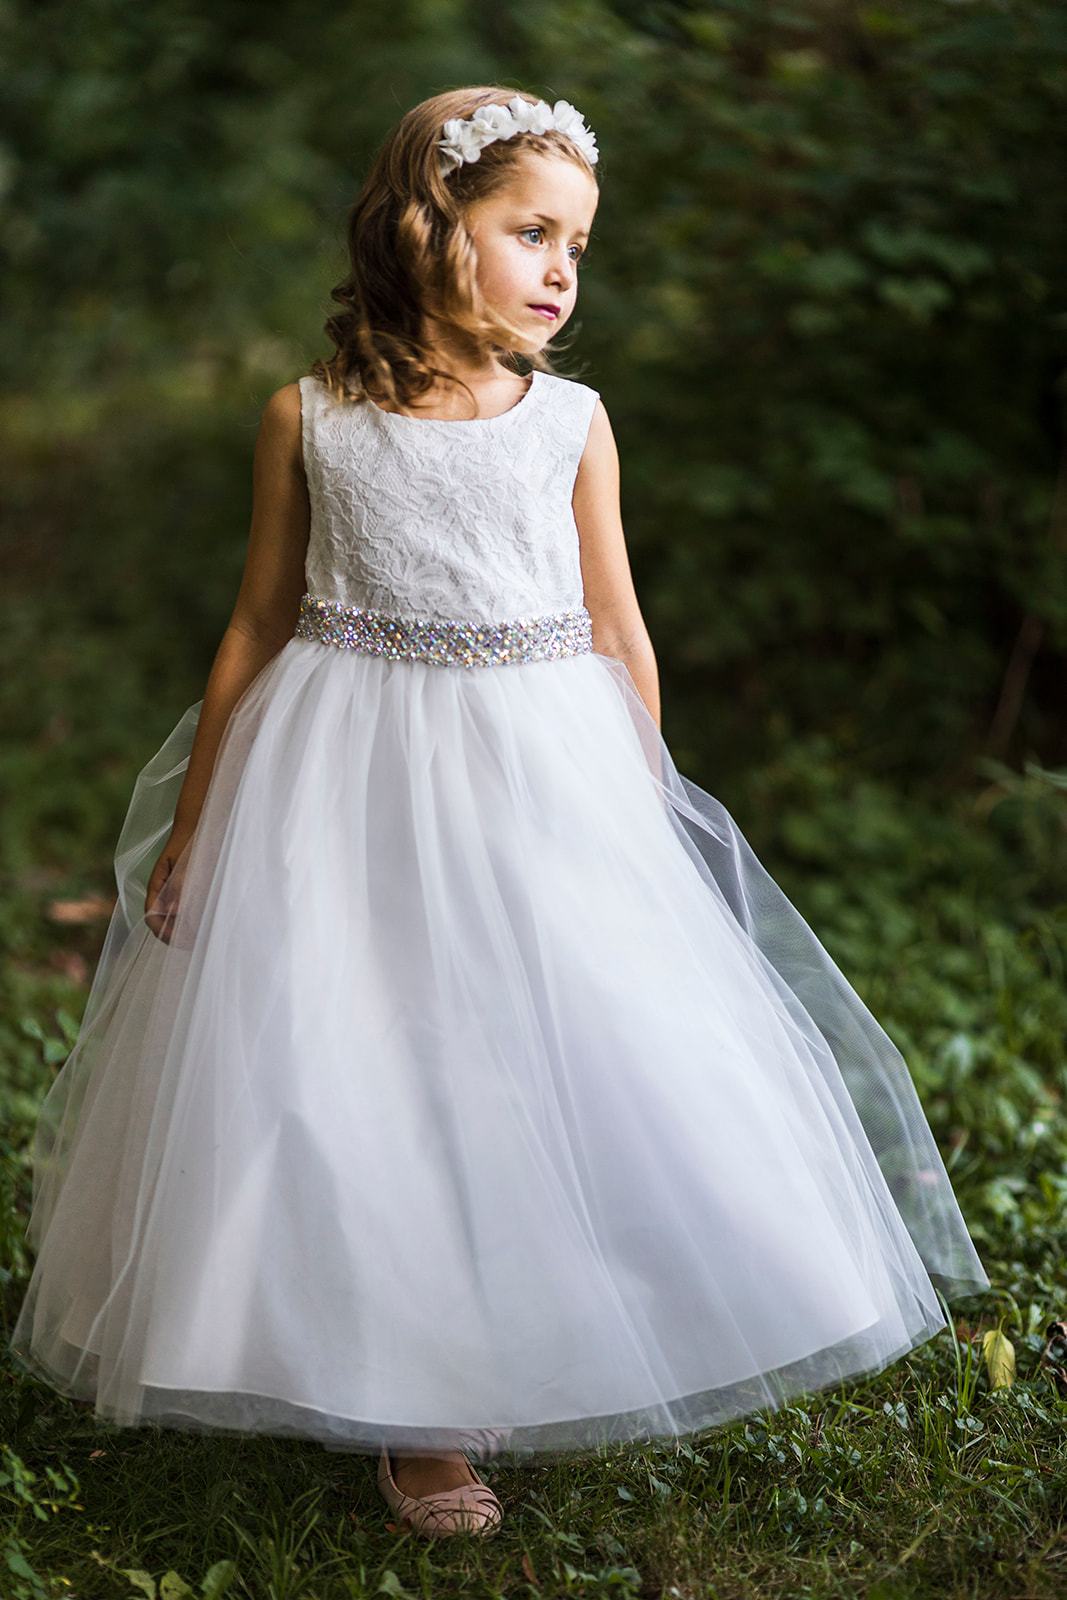 Long Lace Illusion with Thick Rhinestone Trim Girl Party Dress by AS524-E Kids Dream - Girl Formal Dresses